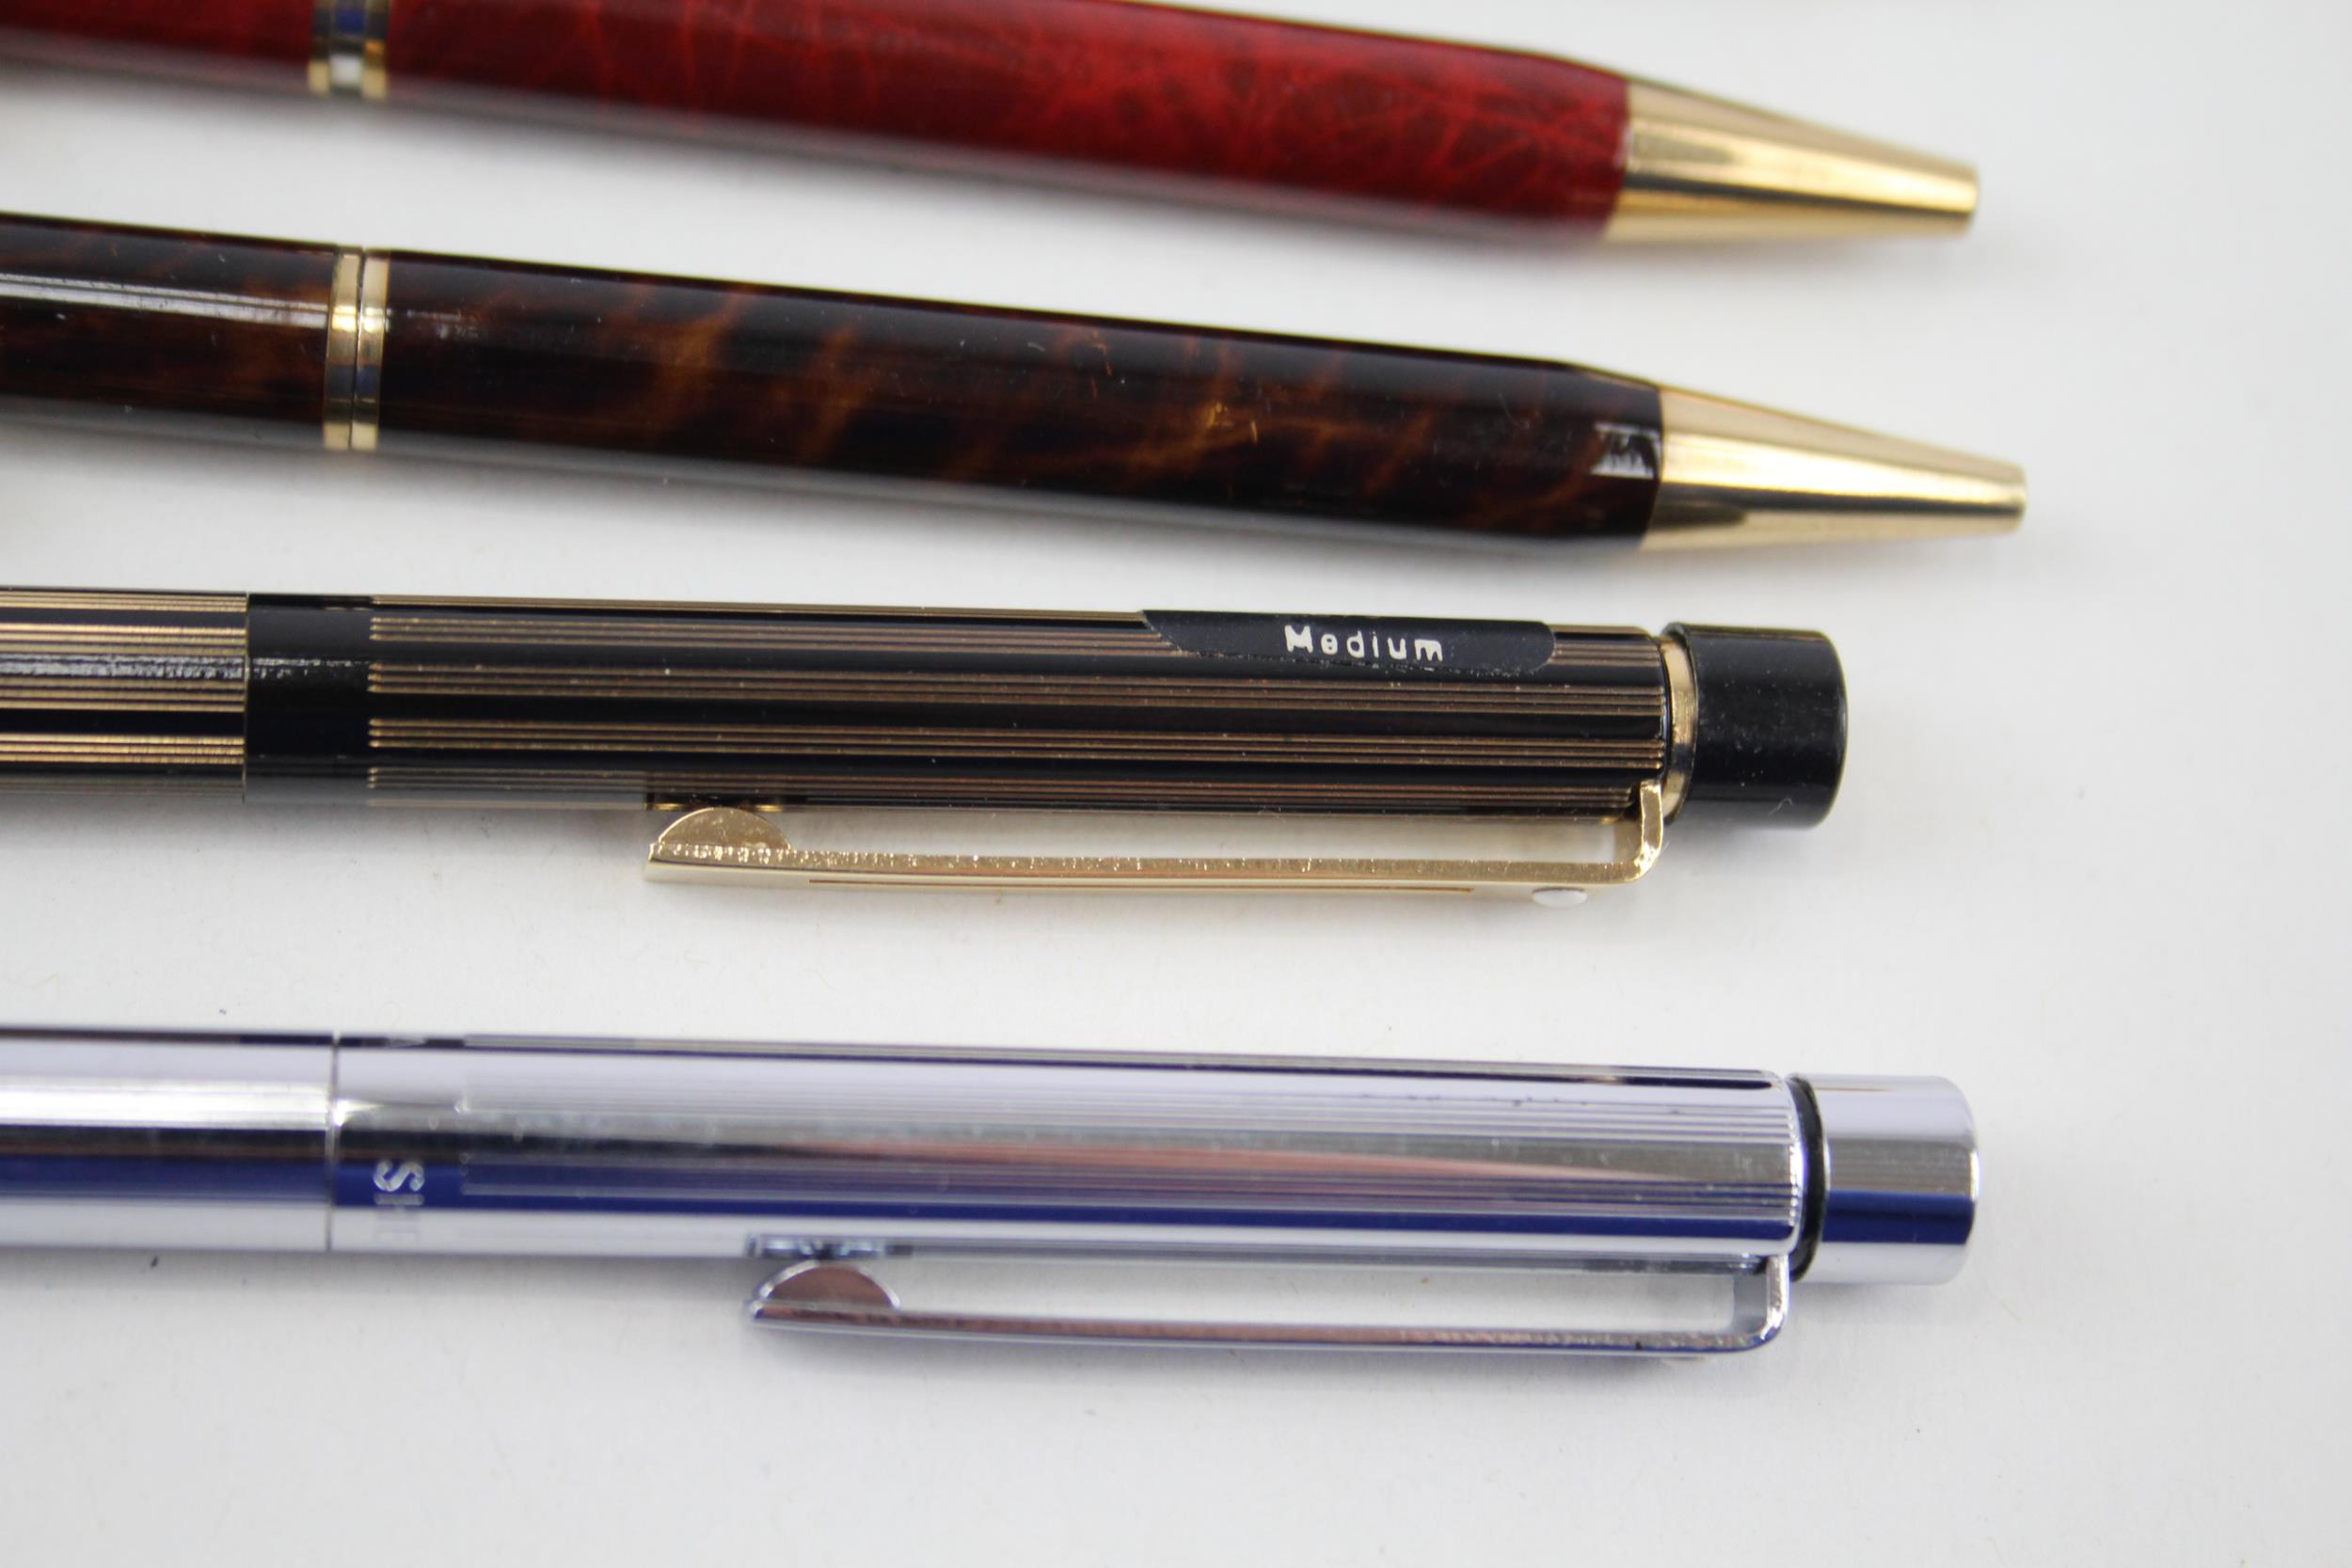 6 x SHEAFFER Ballpoint Pens / Biros Inc Vintage, Targa, Lacquer Etc - UNTESTED Items are in - Image 5 of 6